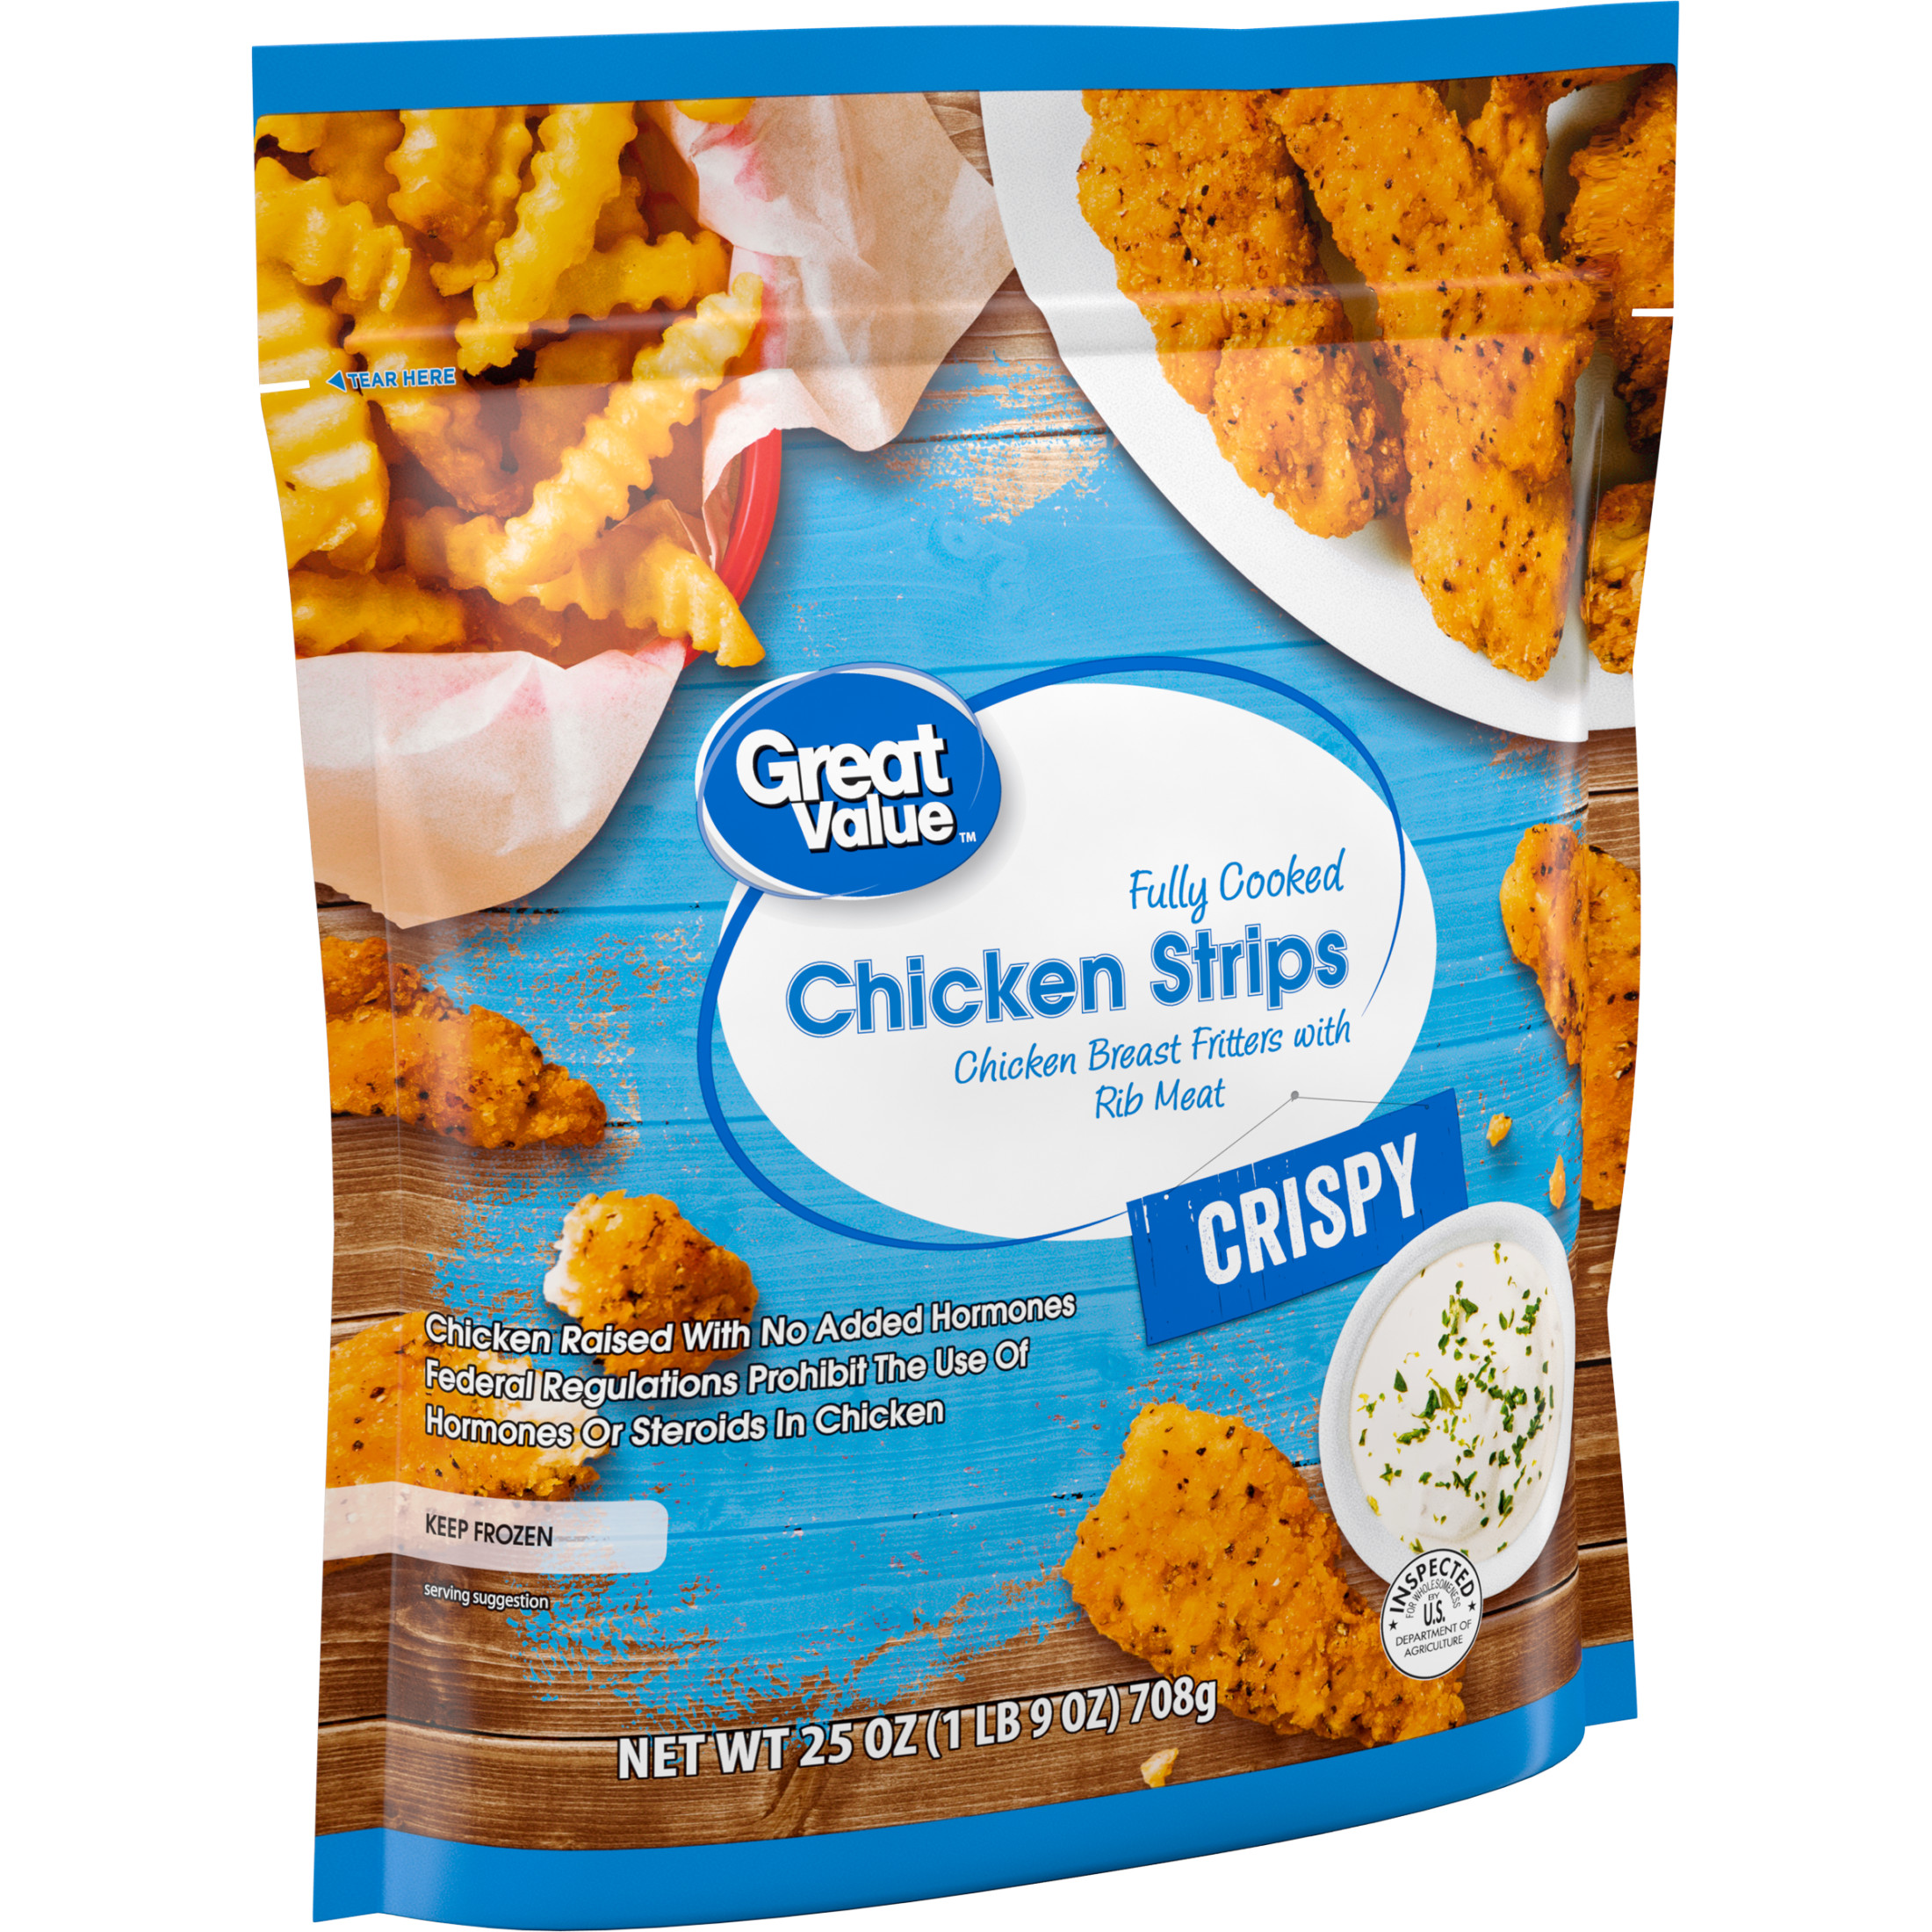 Great Value Fully Cooked Chicken Strips, 25 oz (Frozen) - image 2 of 11